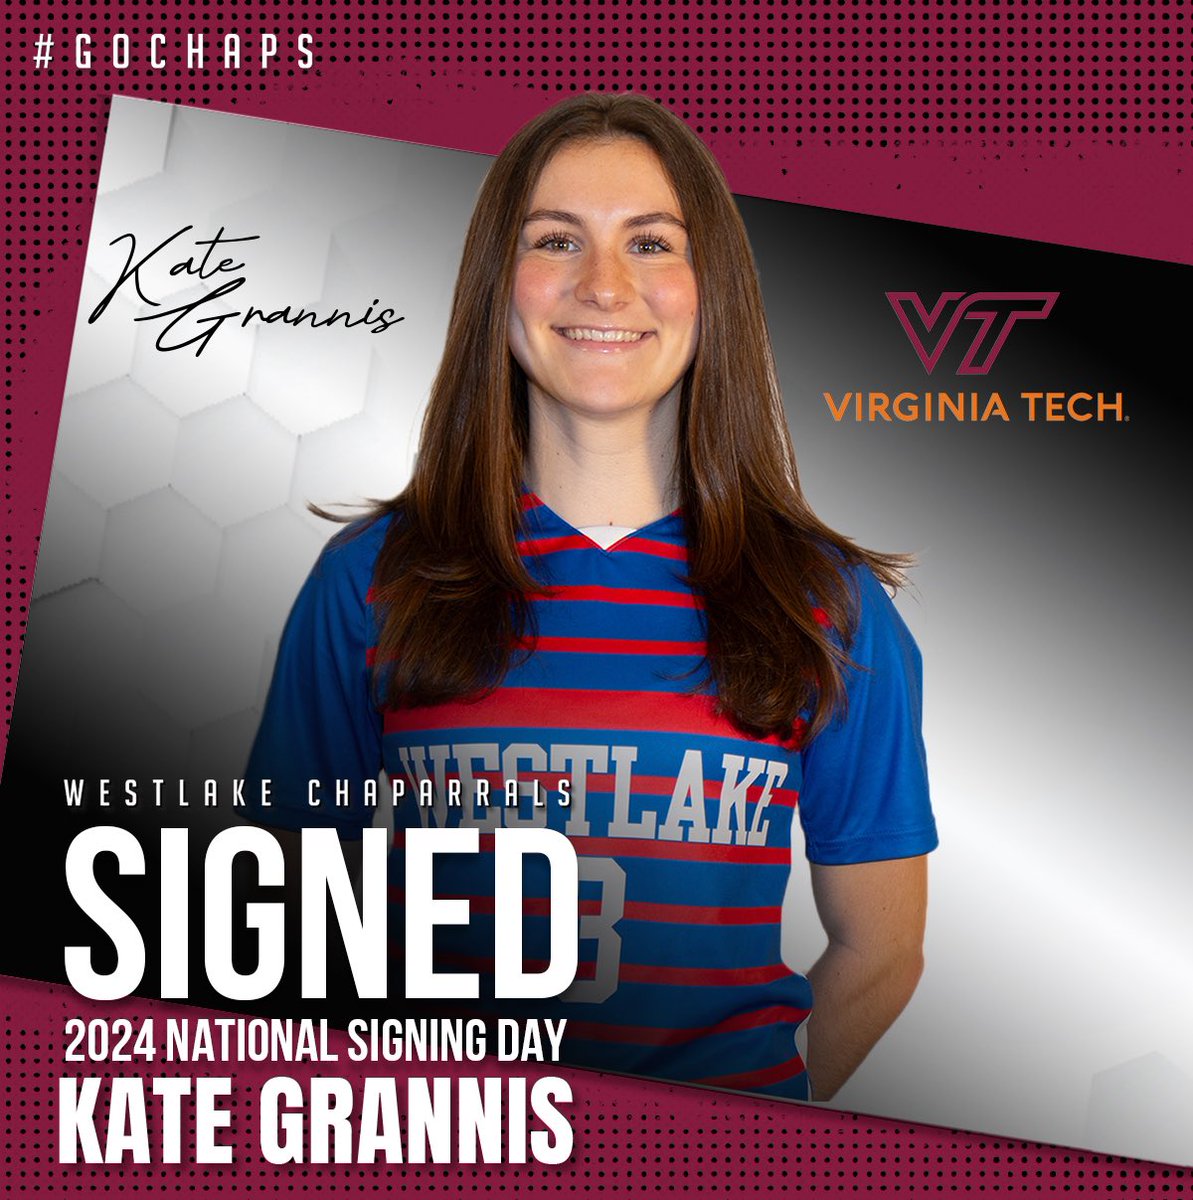 Kate Grannis is taking her academic and soccer skills to Blacksburg as she signs with Virginia Tech. Congratulations, Kate. #Hokies⚽️ #GoChaps